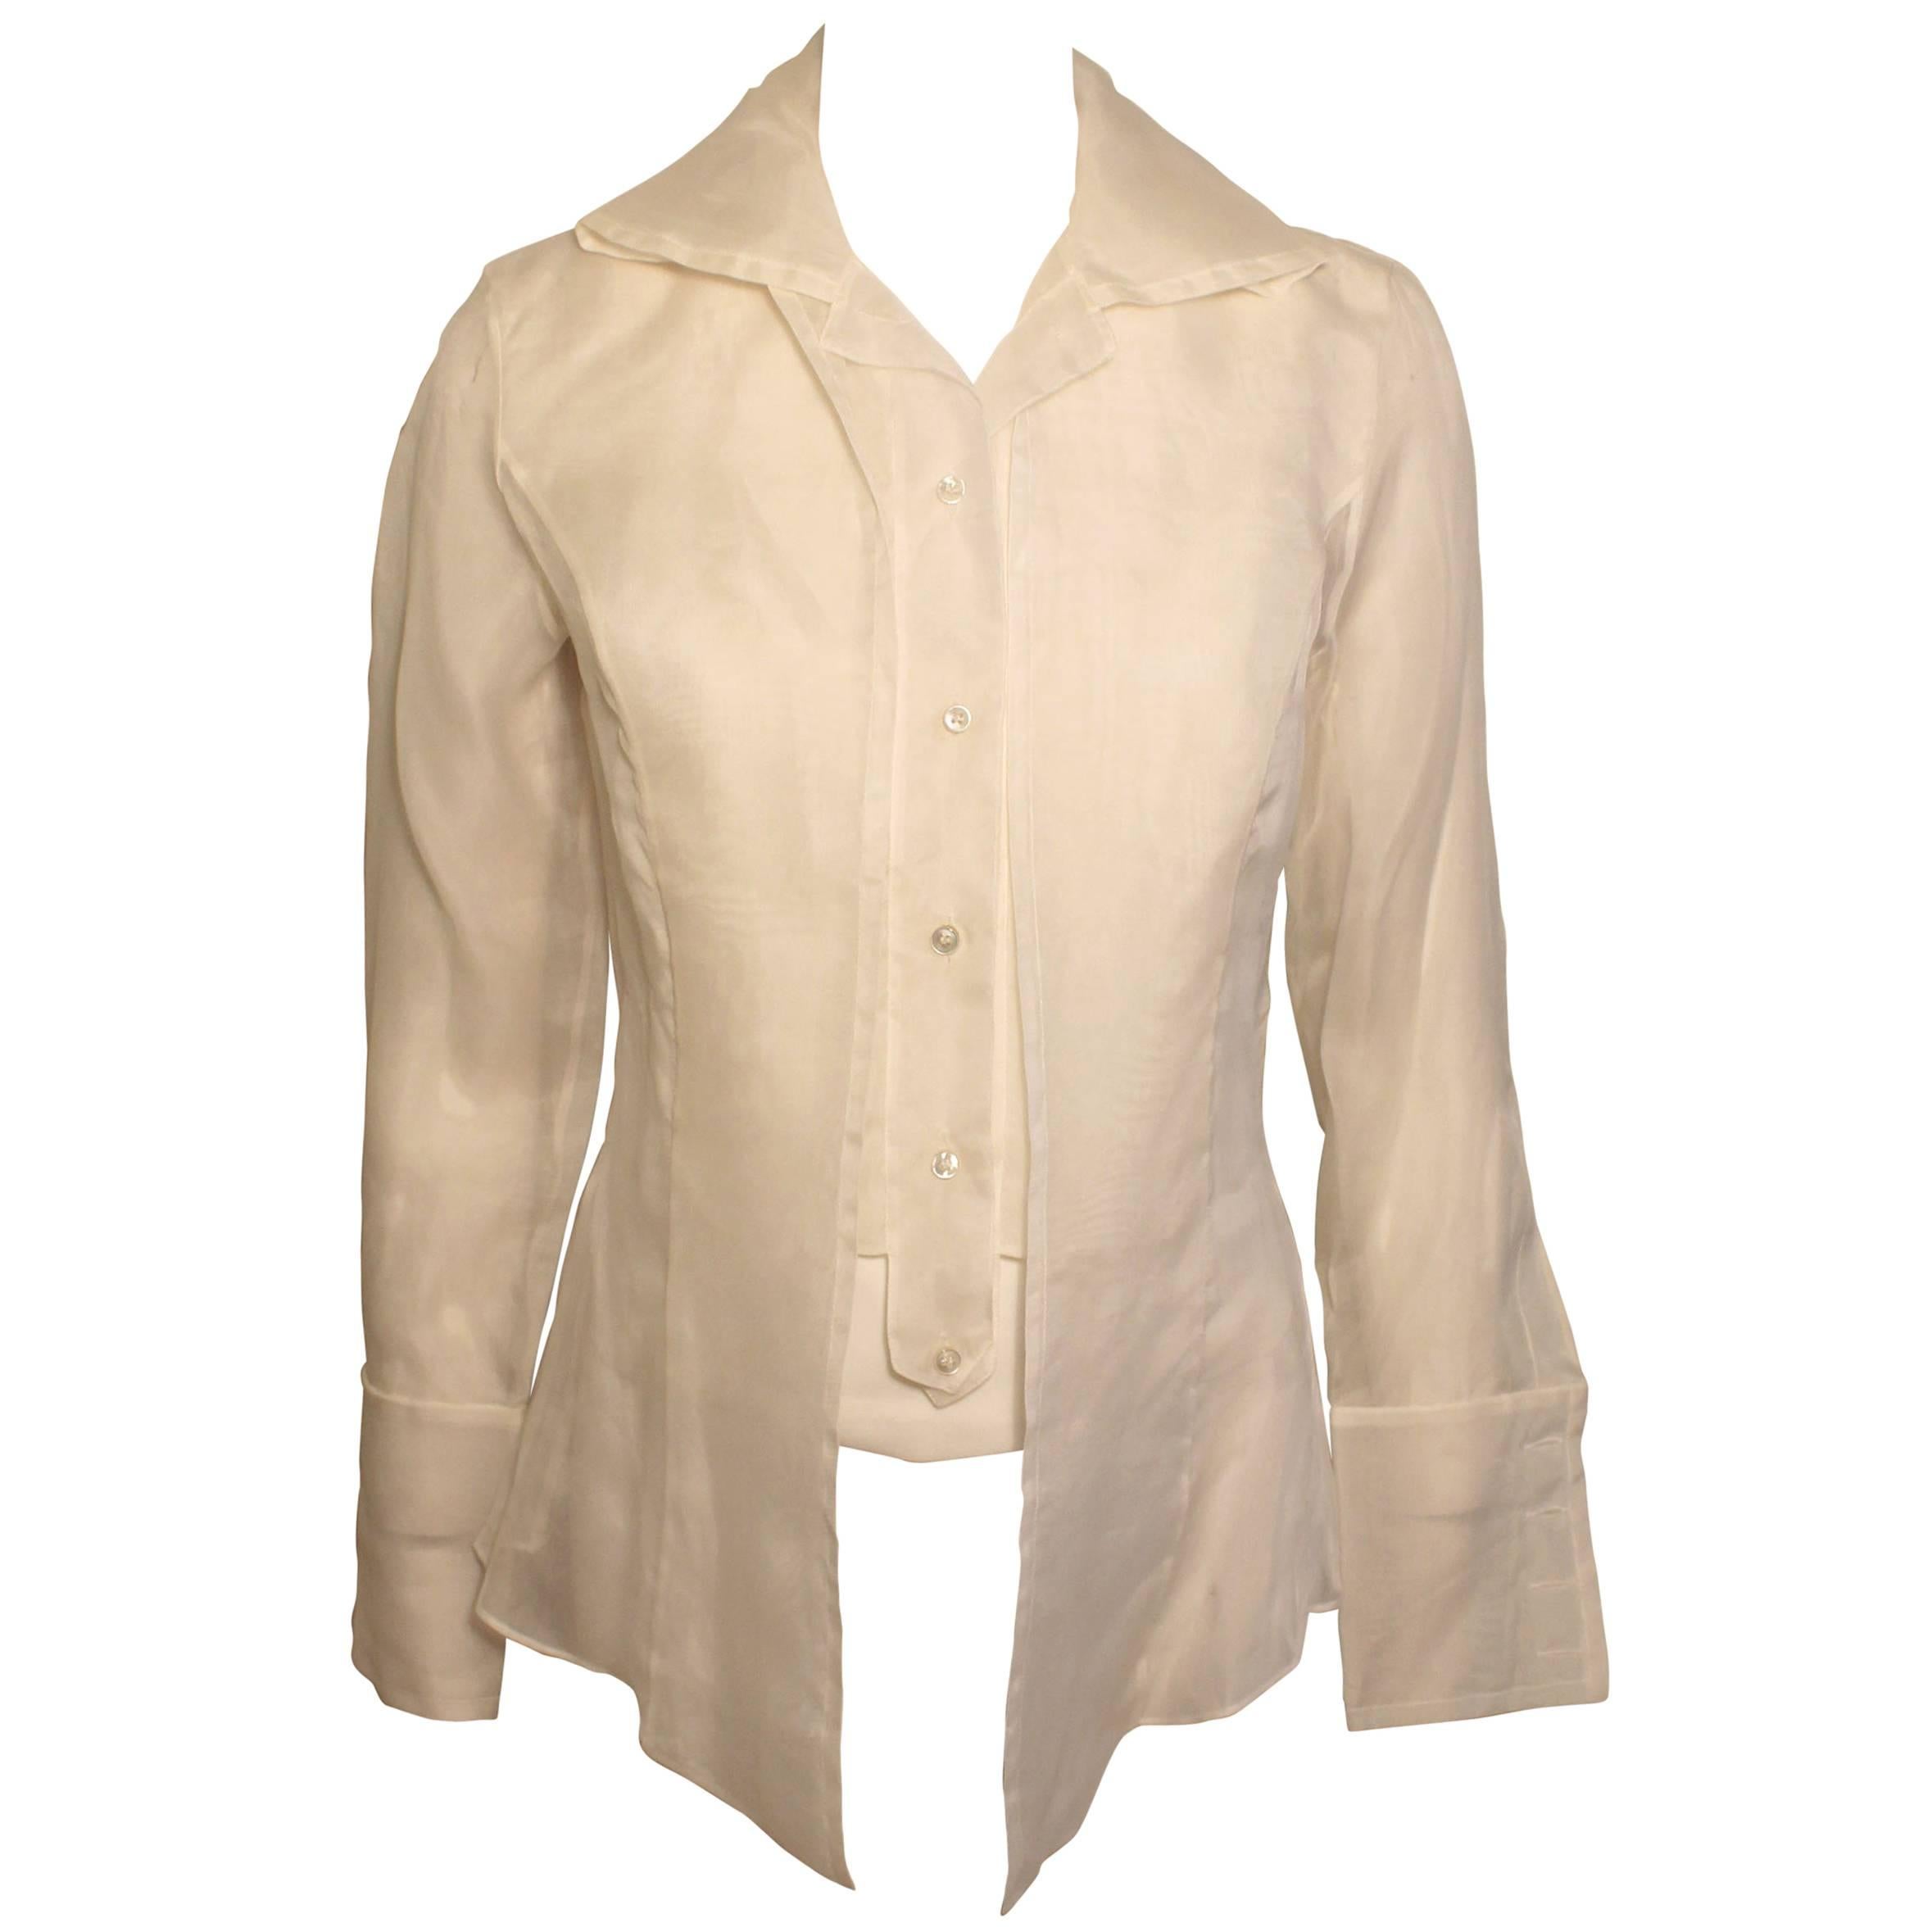 Gianfranco Ferre 2 Piece Creme Sheer Silk Blouse with Camisole